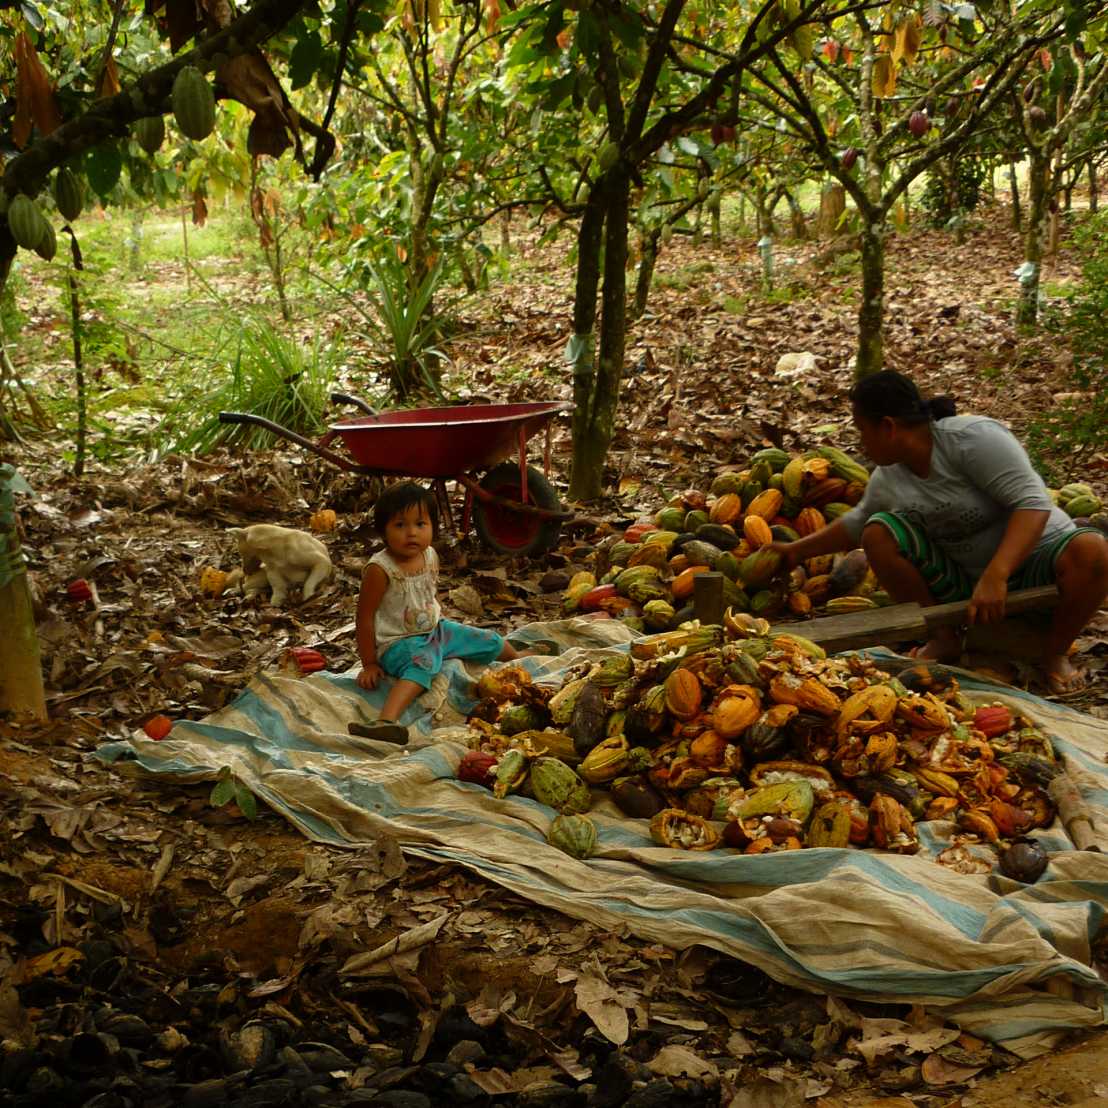 Enlarged view: cocoa farmers